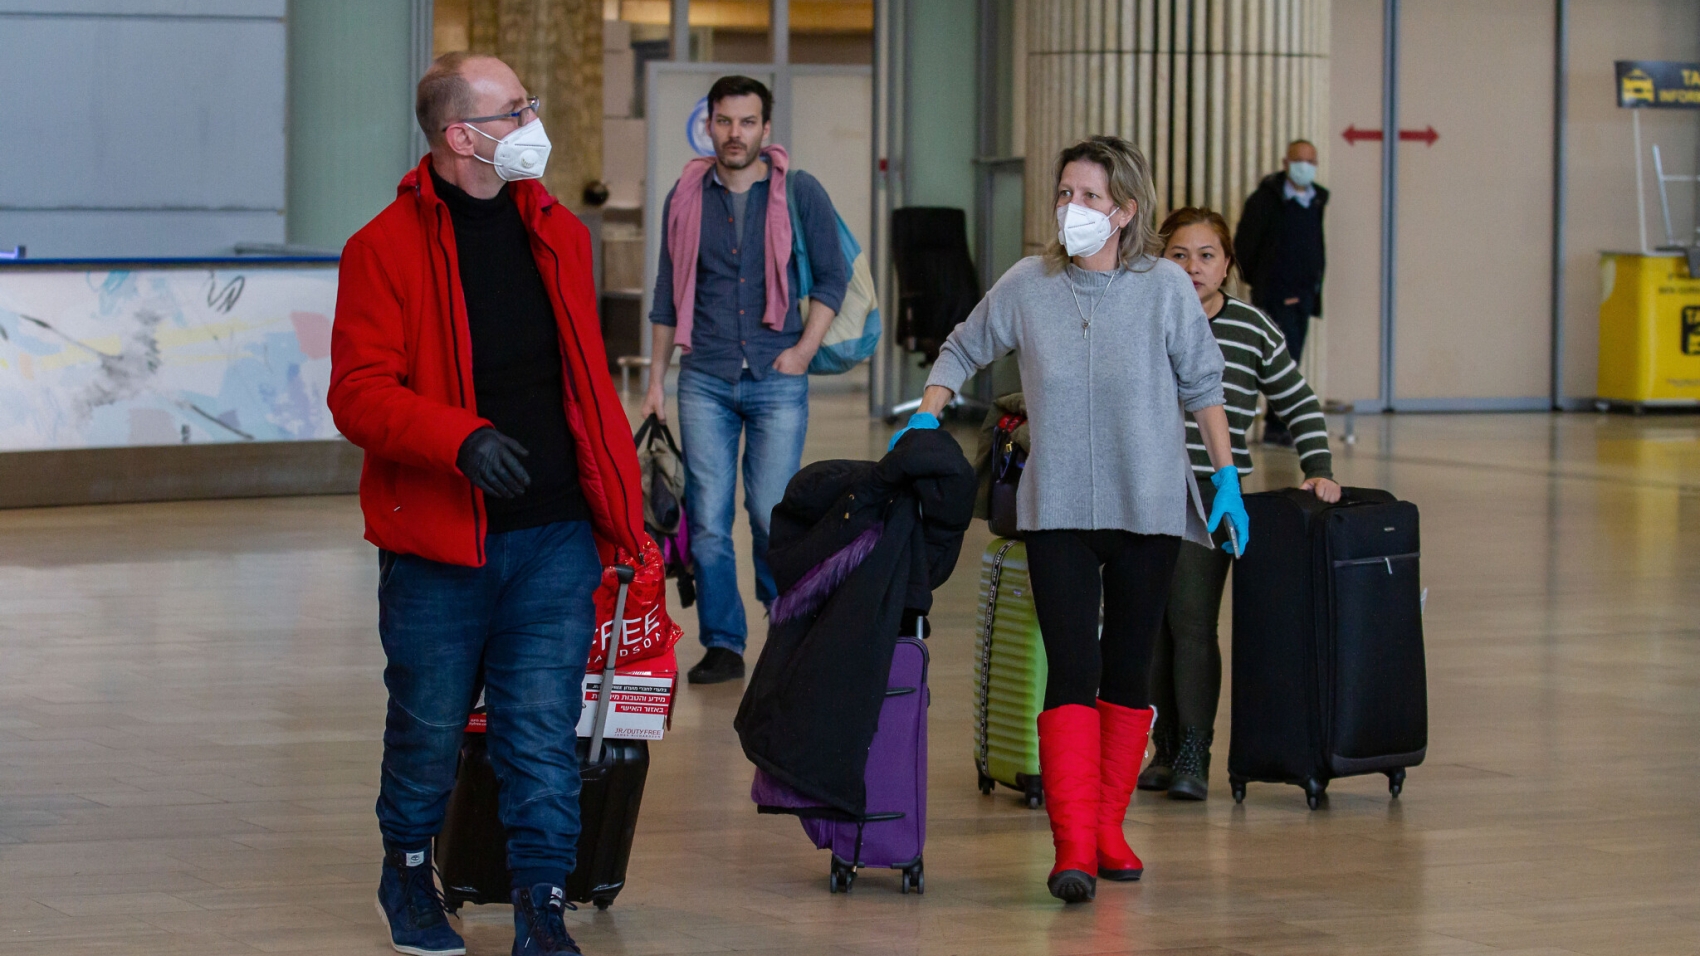 People wearing face masks for fear of the coronavirus at the Ben Gurion International Airport on February 27, 2020. Photo by Flash90 *** Local Caption *** וירוס
קורונה
מגפה
סין
שדה תעופה